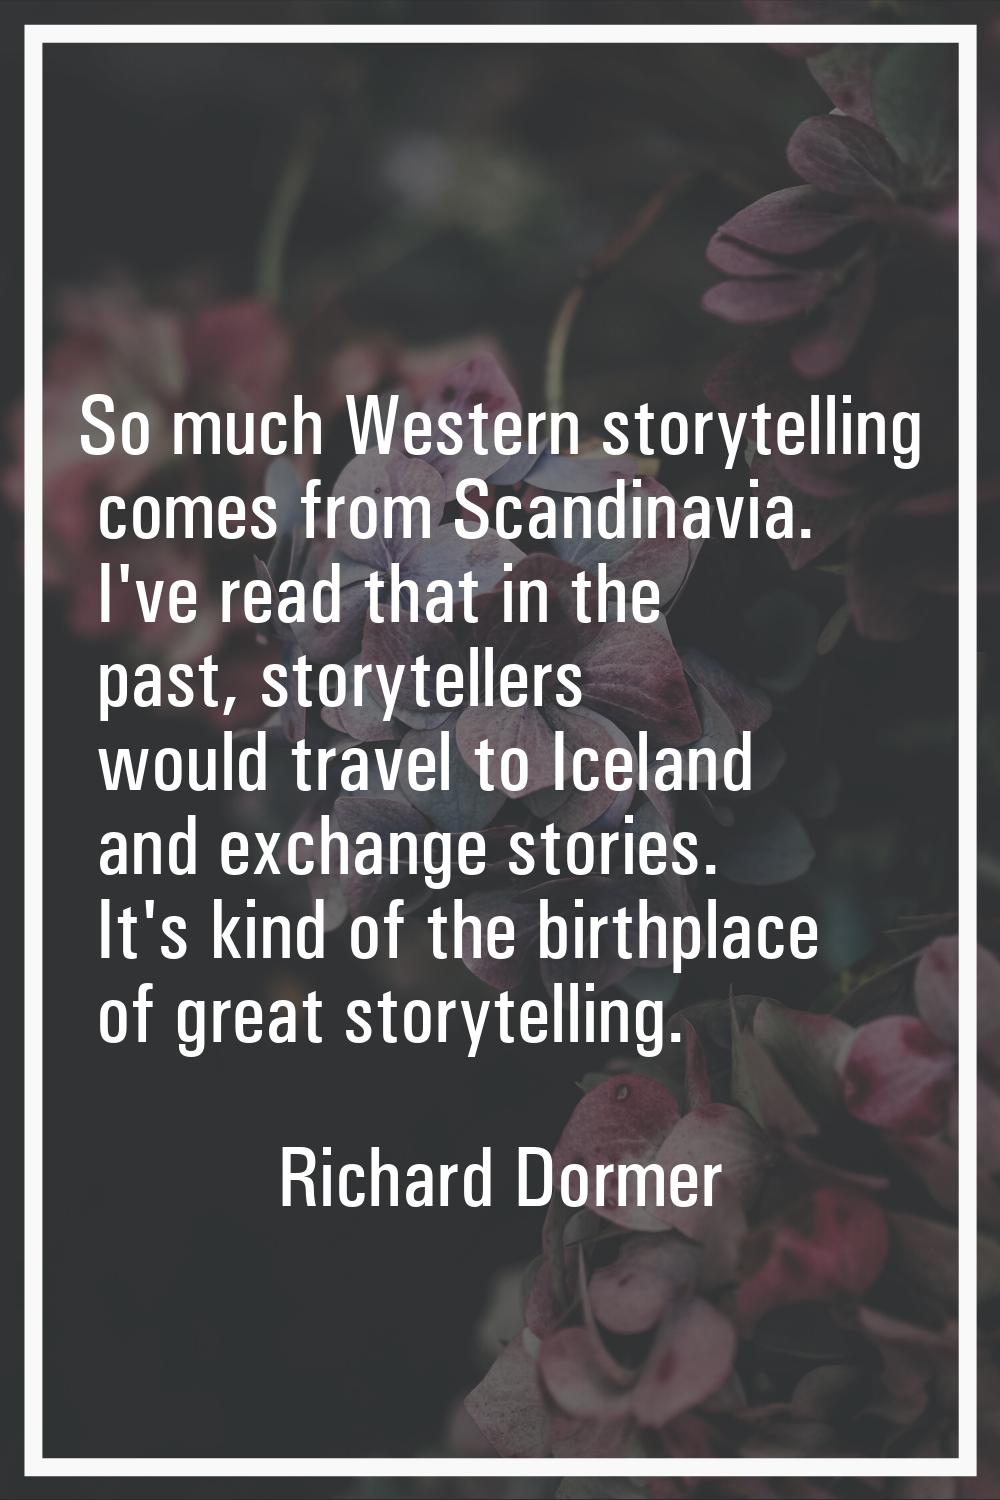 So much Western storytelling comes from Scandinavia. I've read that in the past, storytellers would